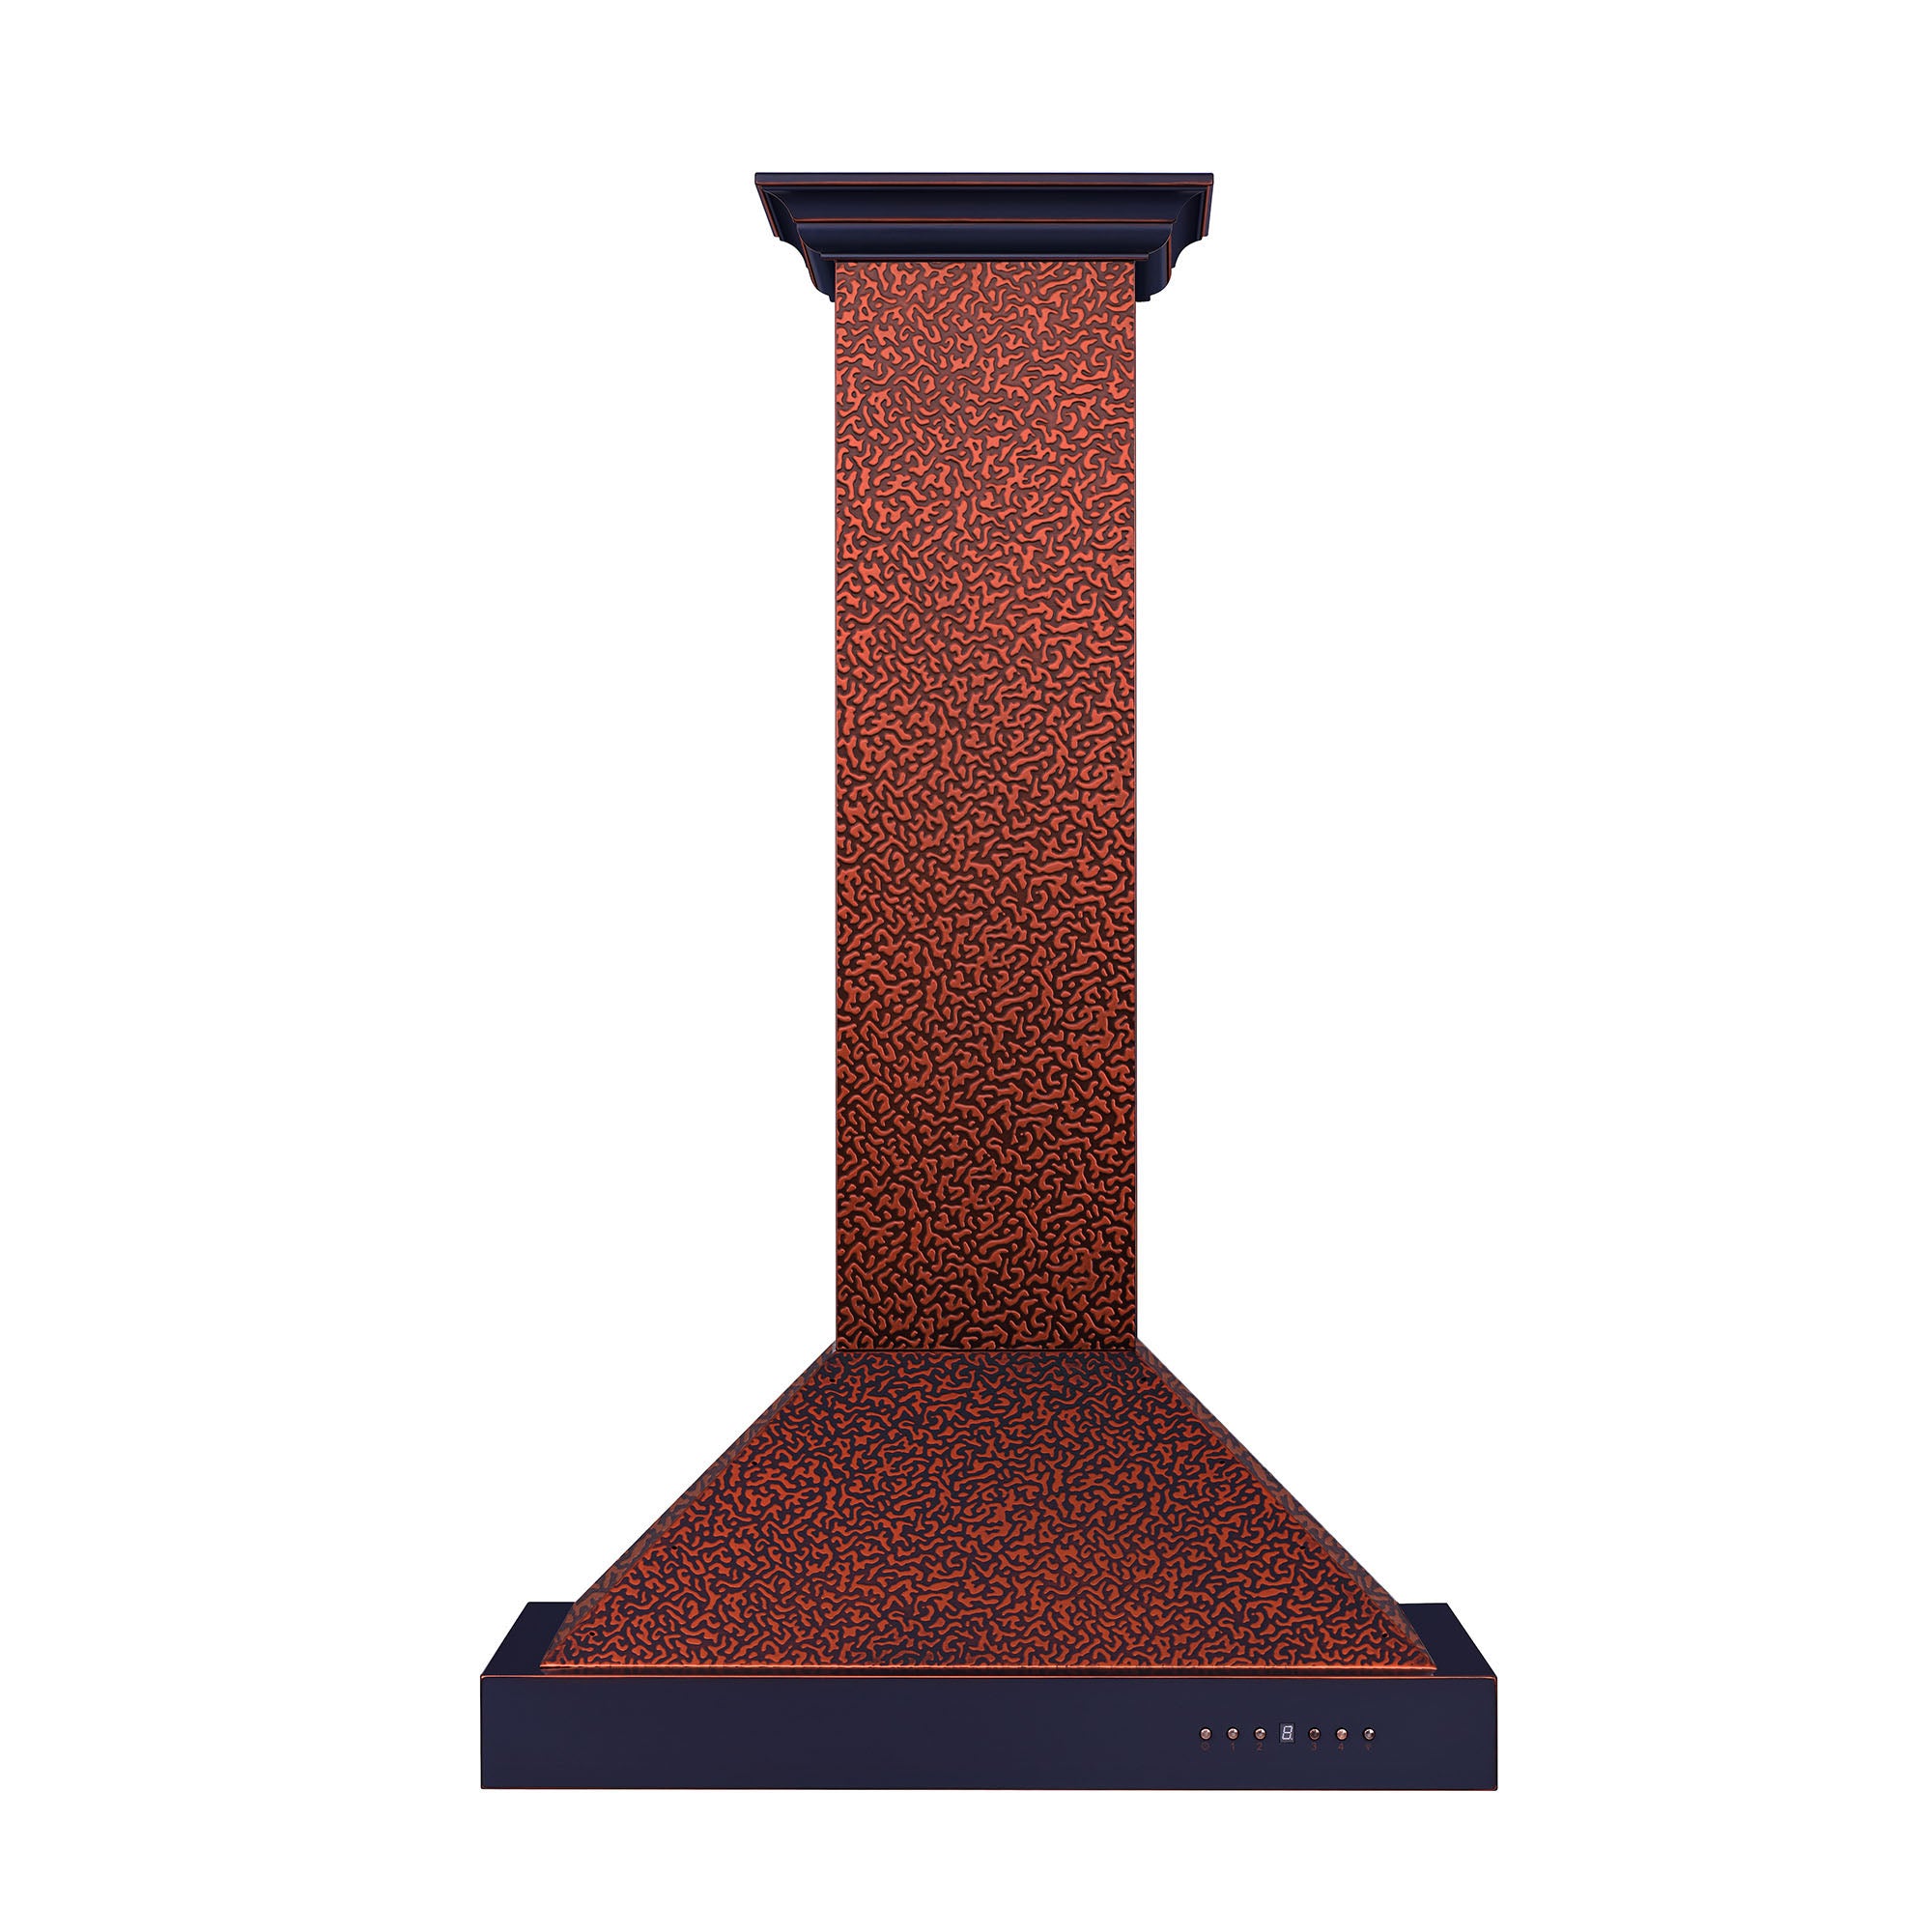 ZLINE Designer Series Wall Mount Range Hood in Embossed Copper with Size Options (KB2-EBXXX) 48 inch front.